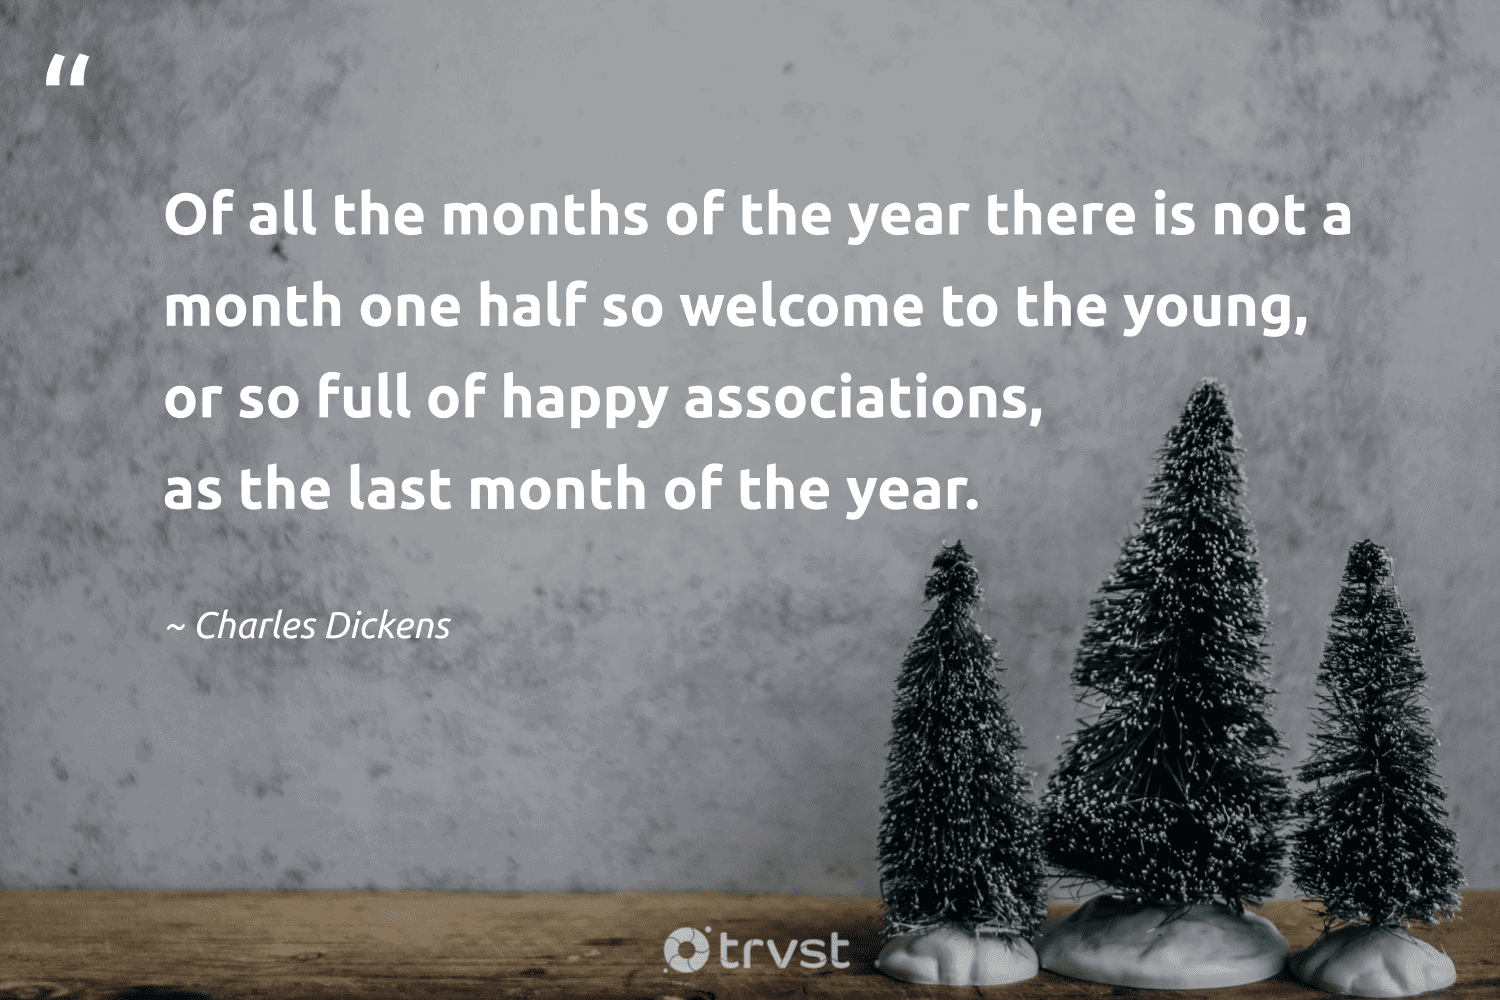 49 December Quotes and Sayings to Love the Last month